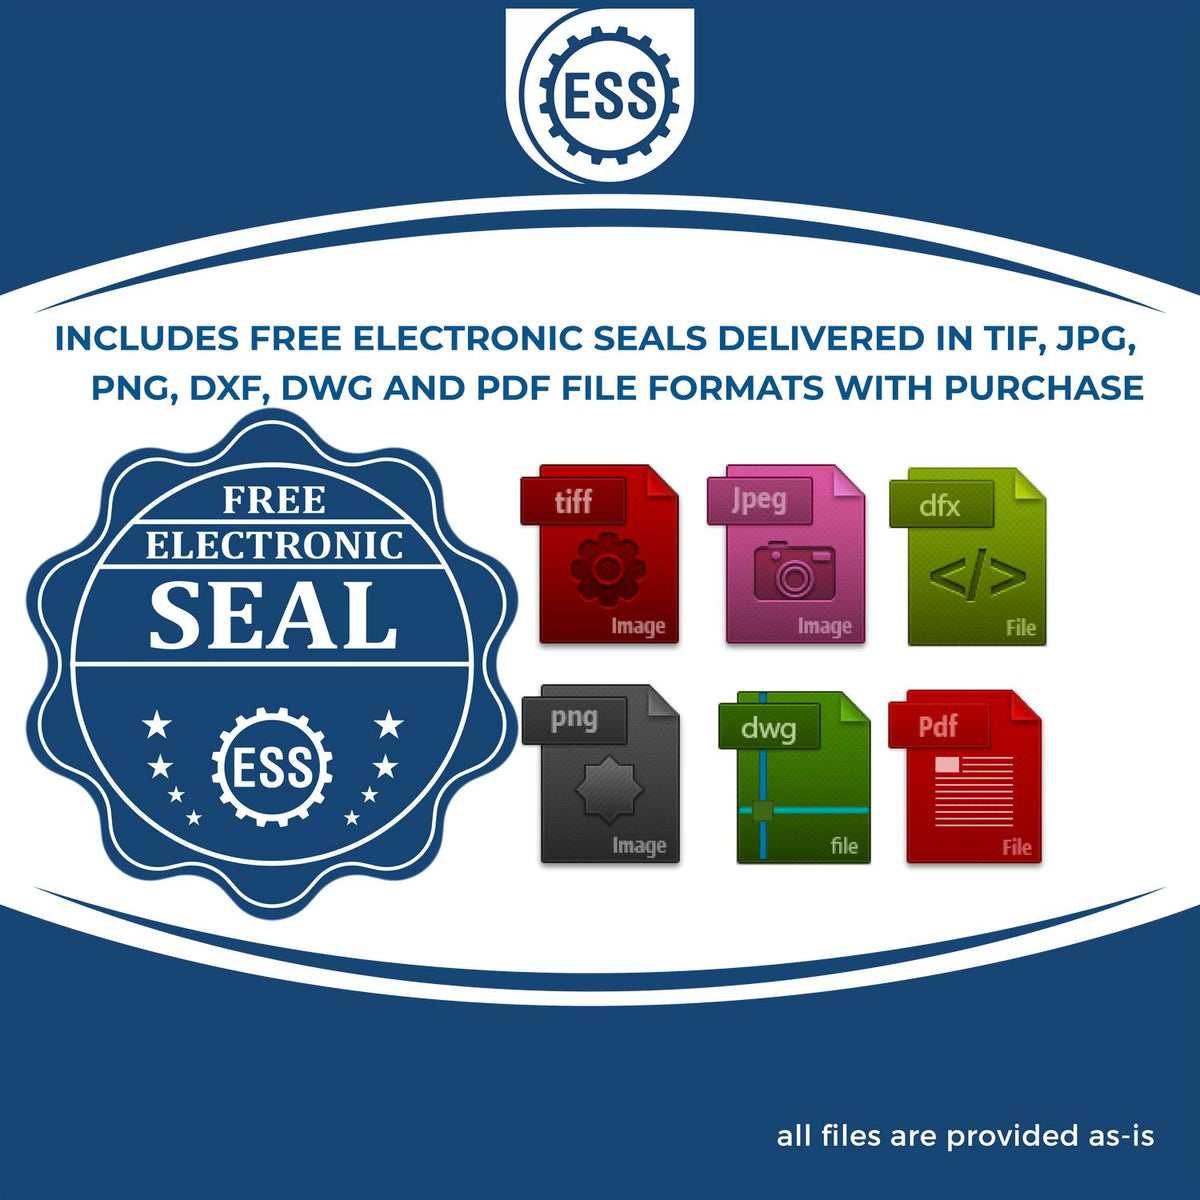 An infographic for the free electronic seal for the Gift Washington Landscape Architect Seal illustrating the different file type icons such as DXF, DWG, TIF, JPG and PNG.